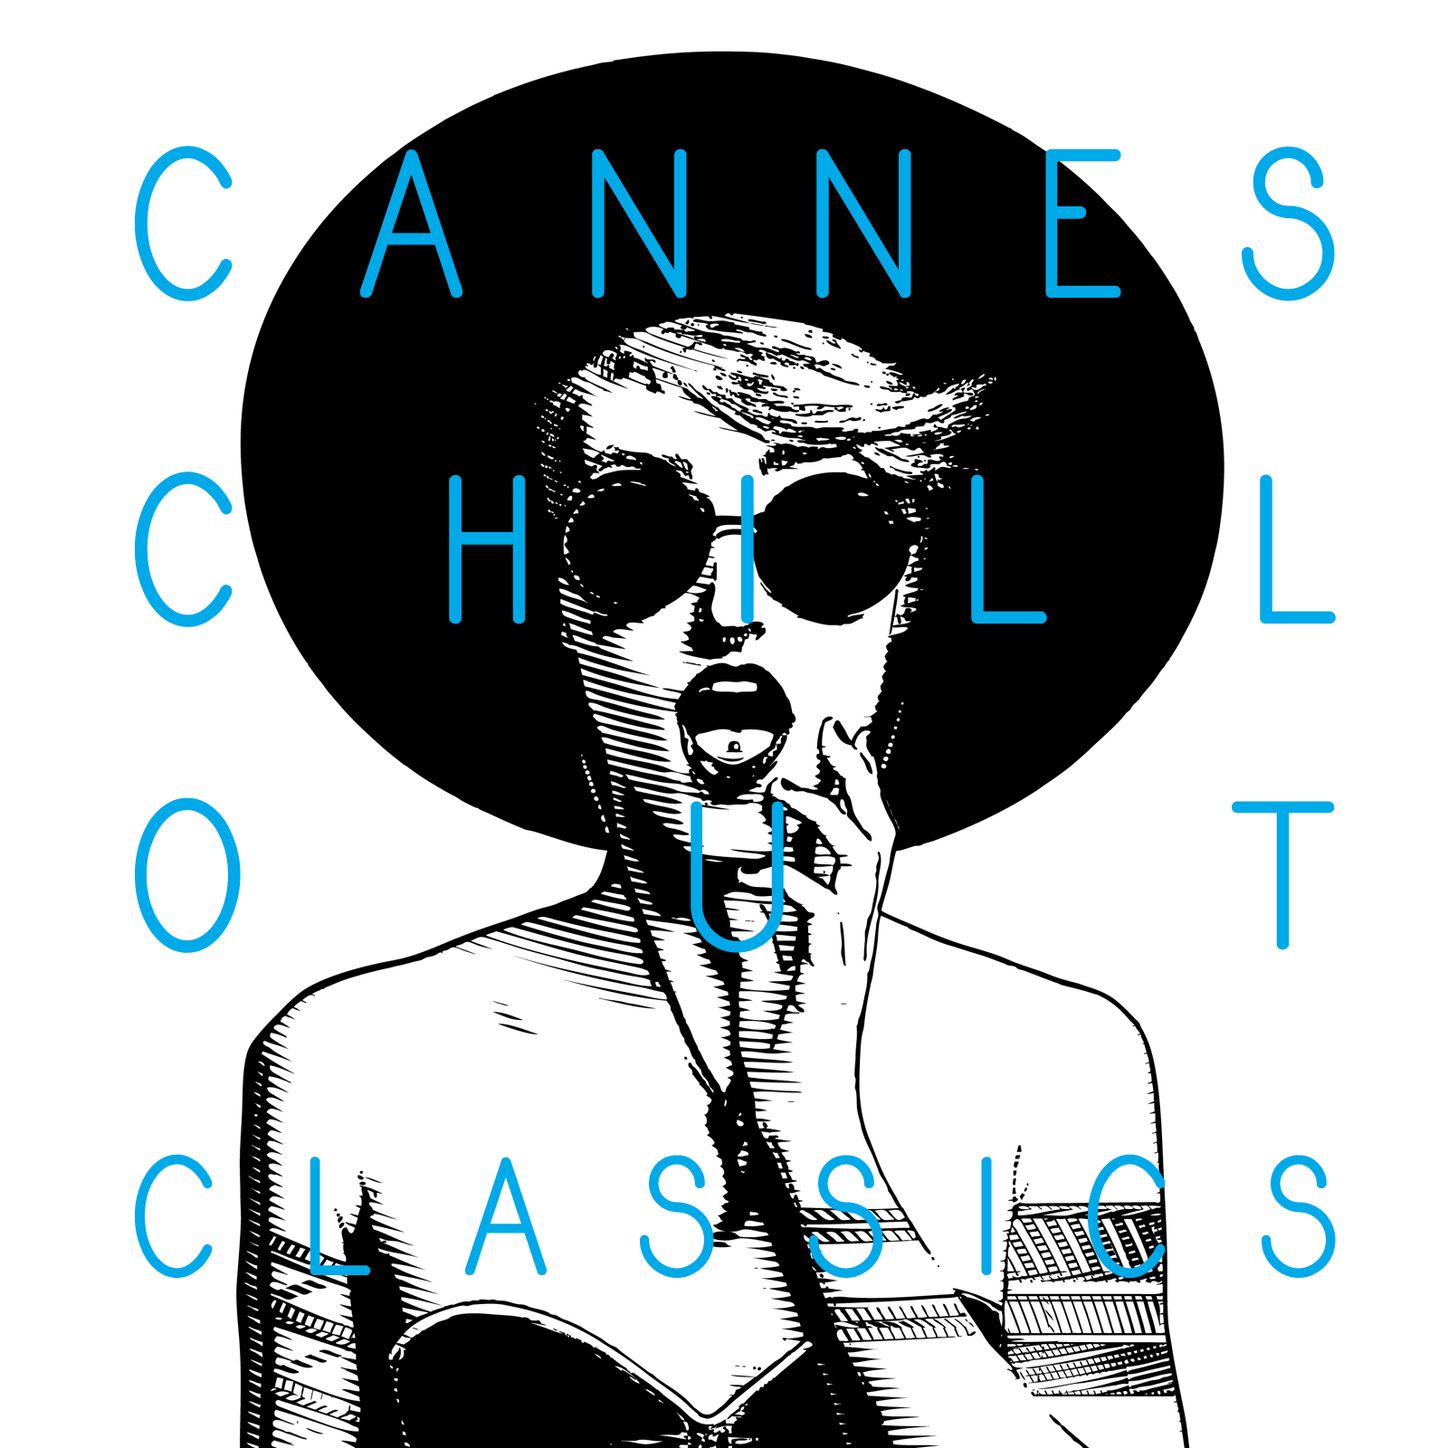 Cannes Chill out Classics